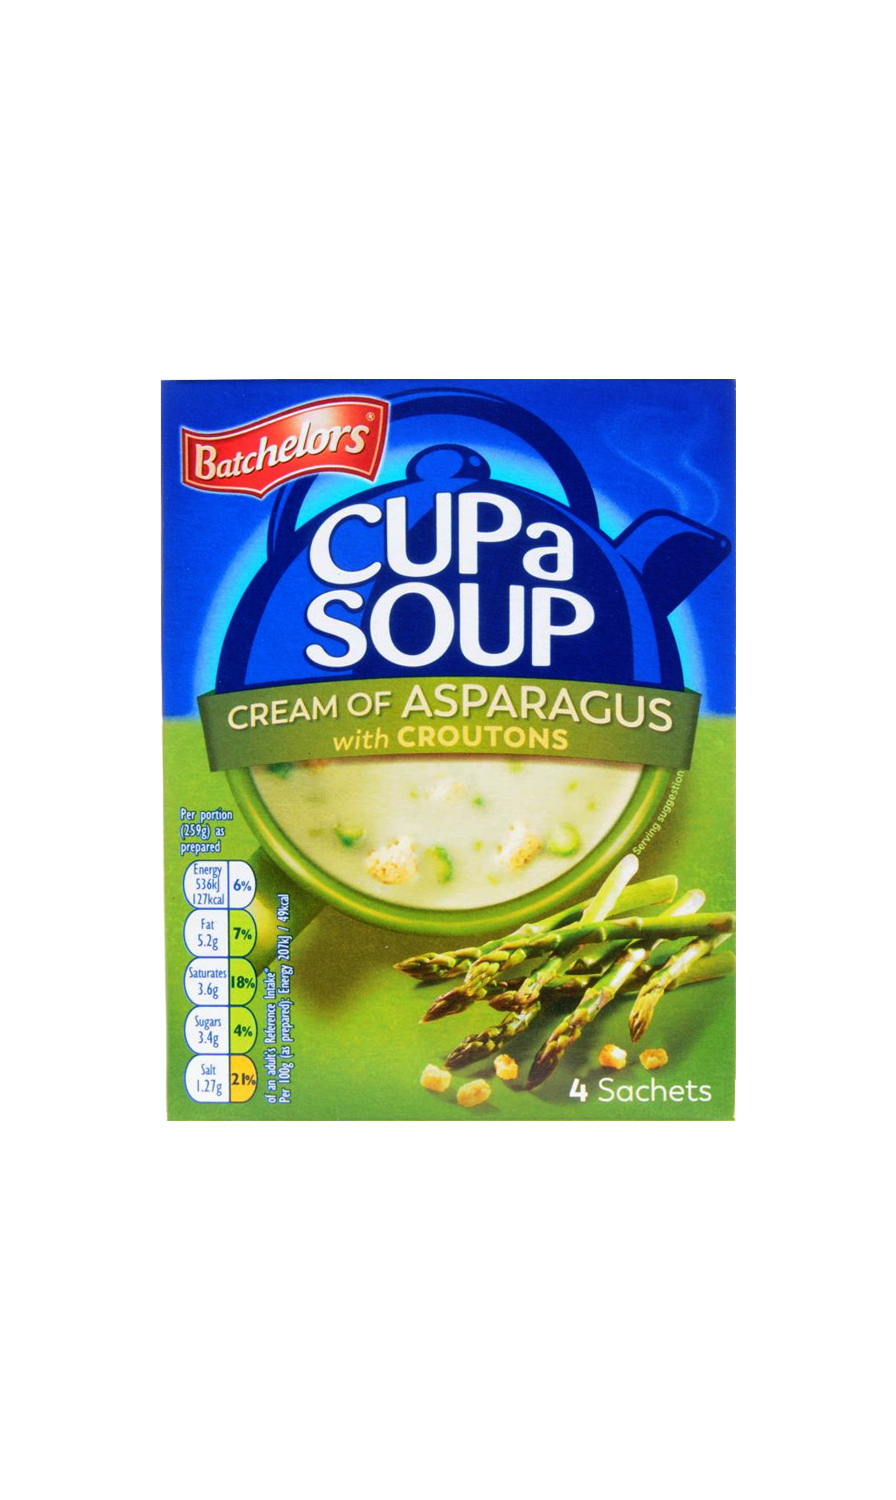 Batchelors Cup a Soup Cream of Asparagus with Croutons 117g